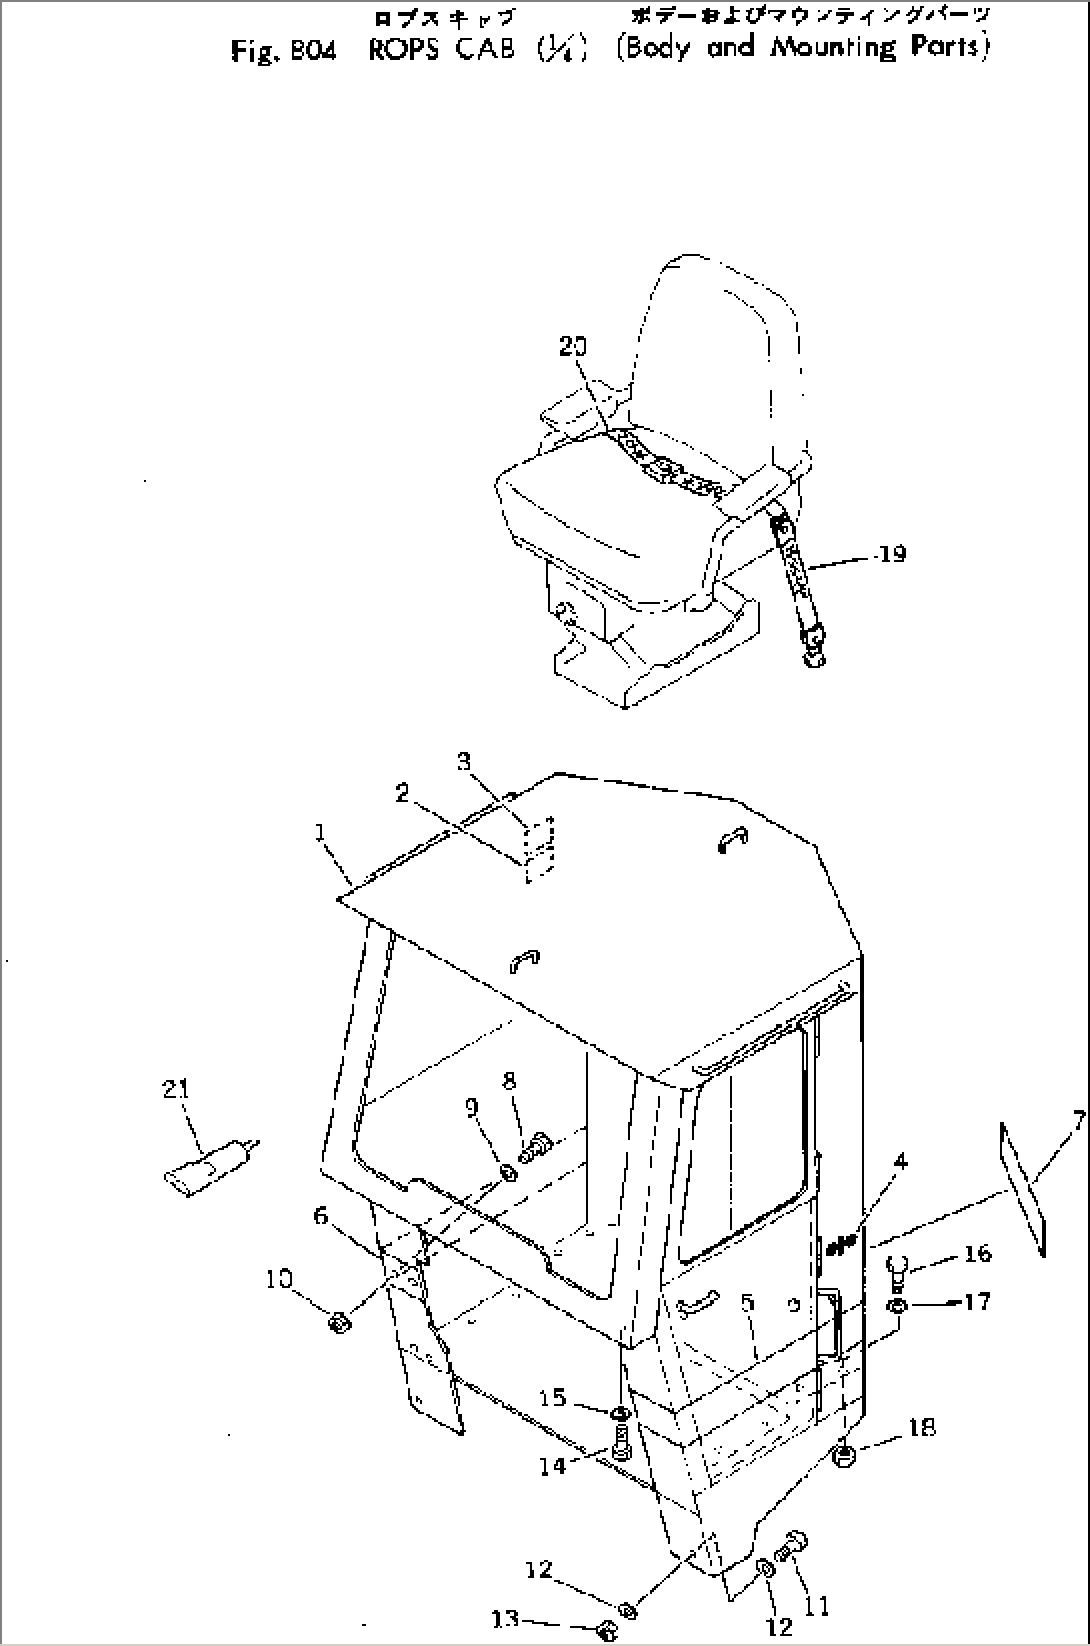 ROPS CAB (1/4) (BODY AND MOUNTING PARTS)(#10001-)